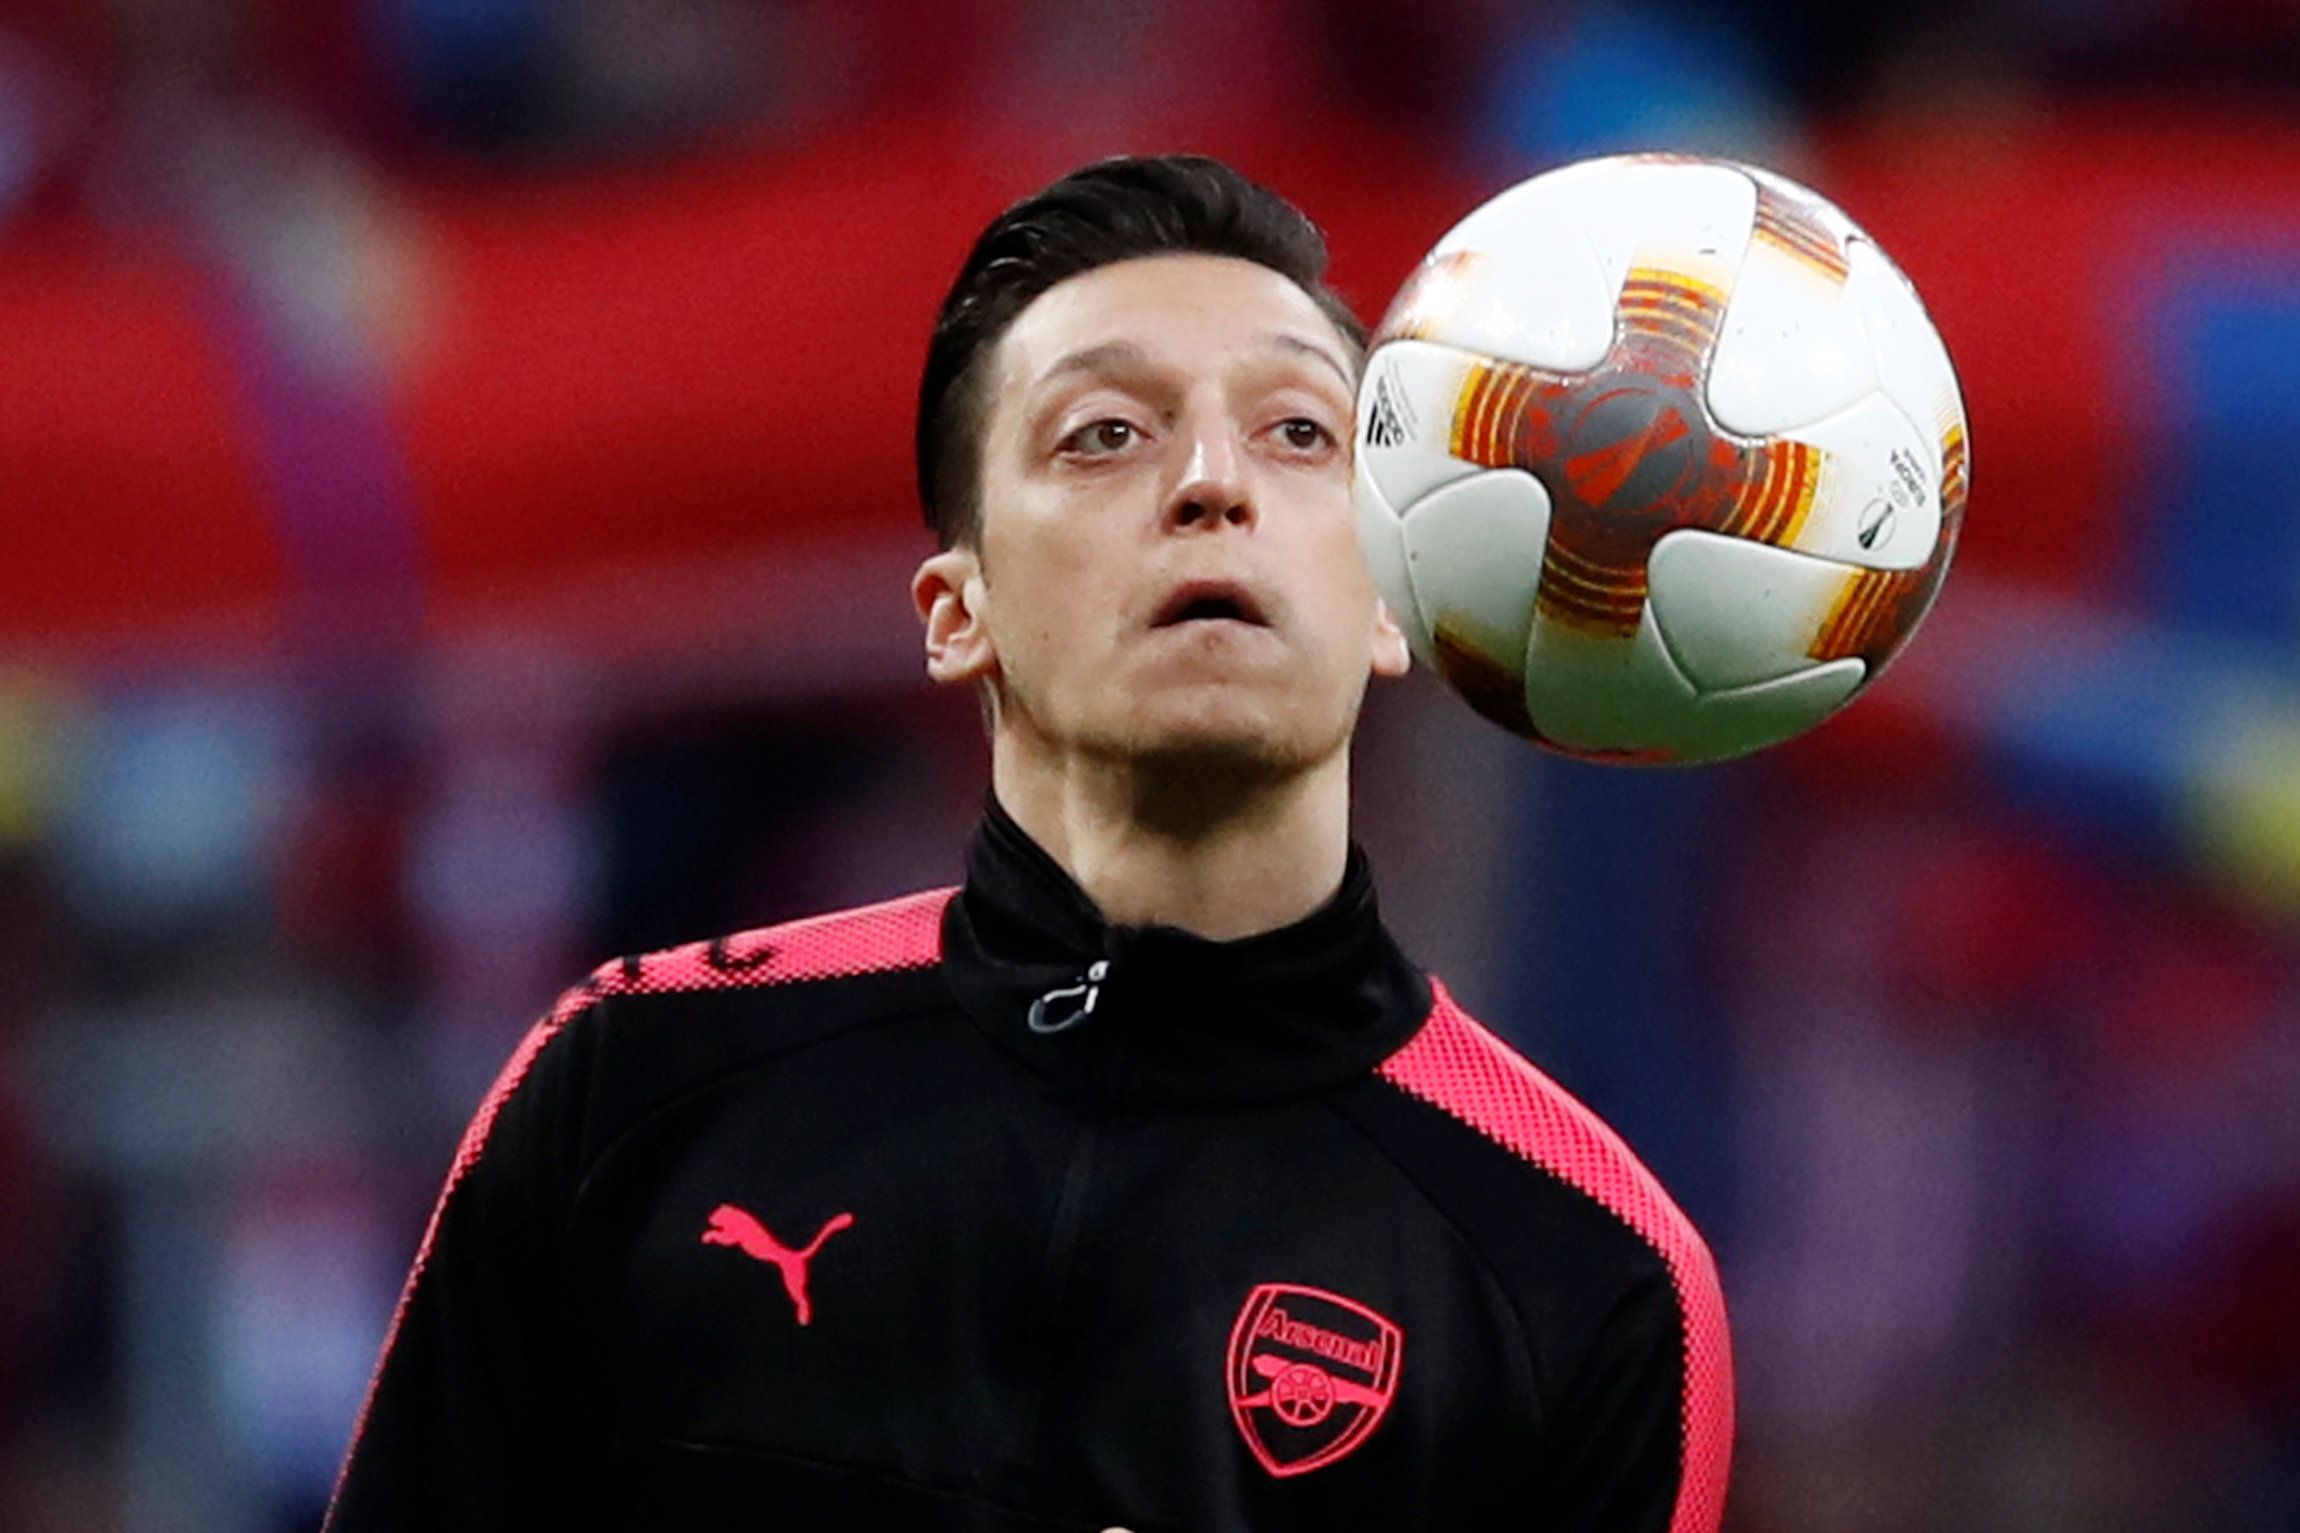 Mesut Ozil looks at the ball in training